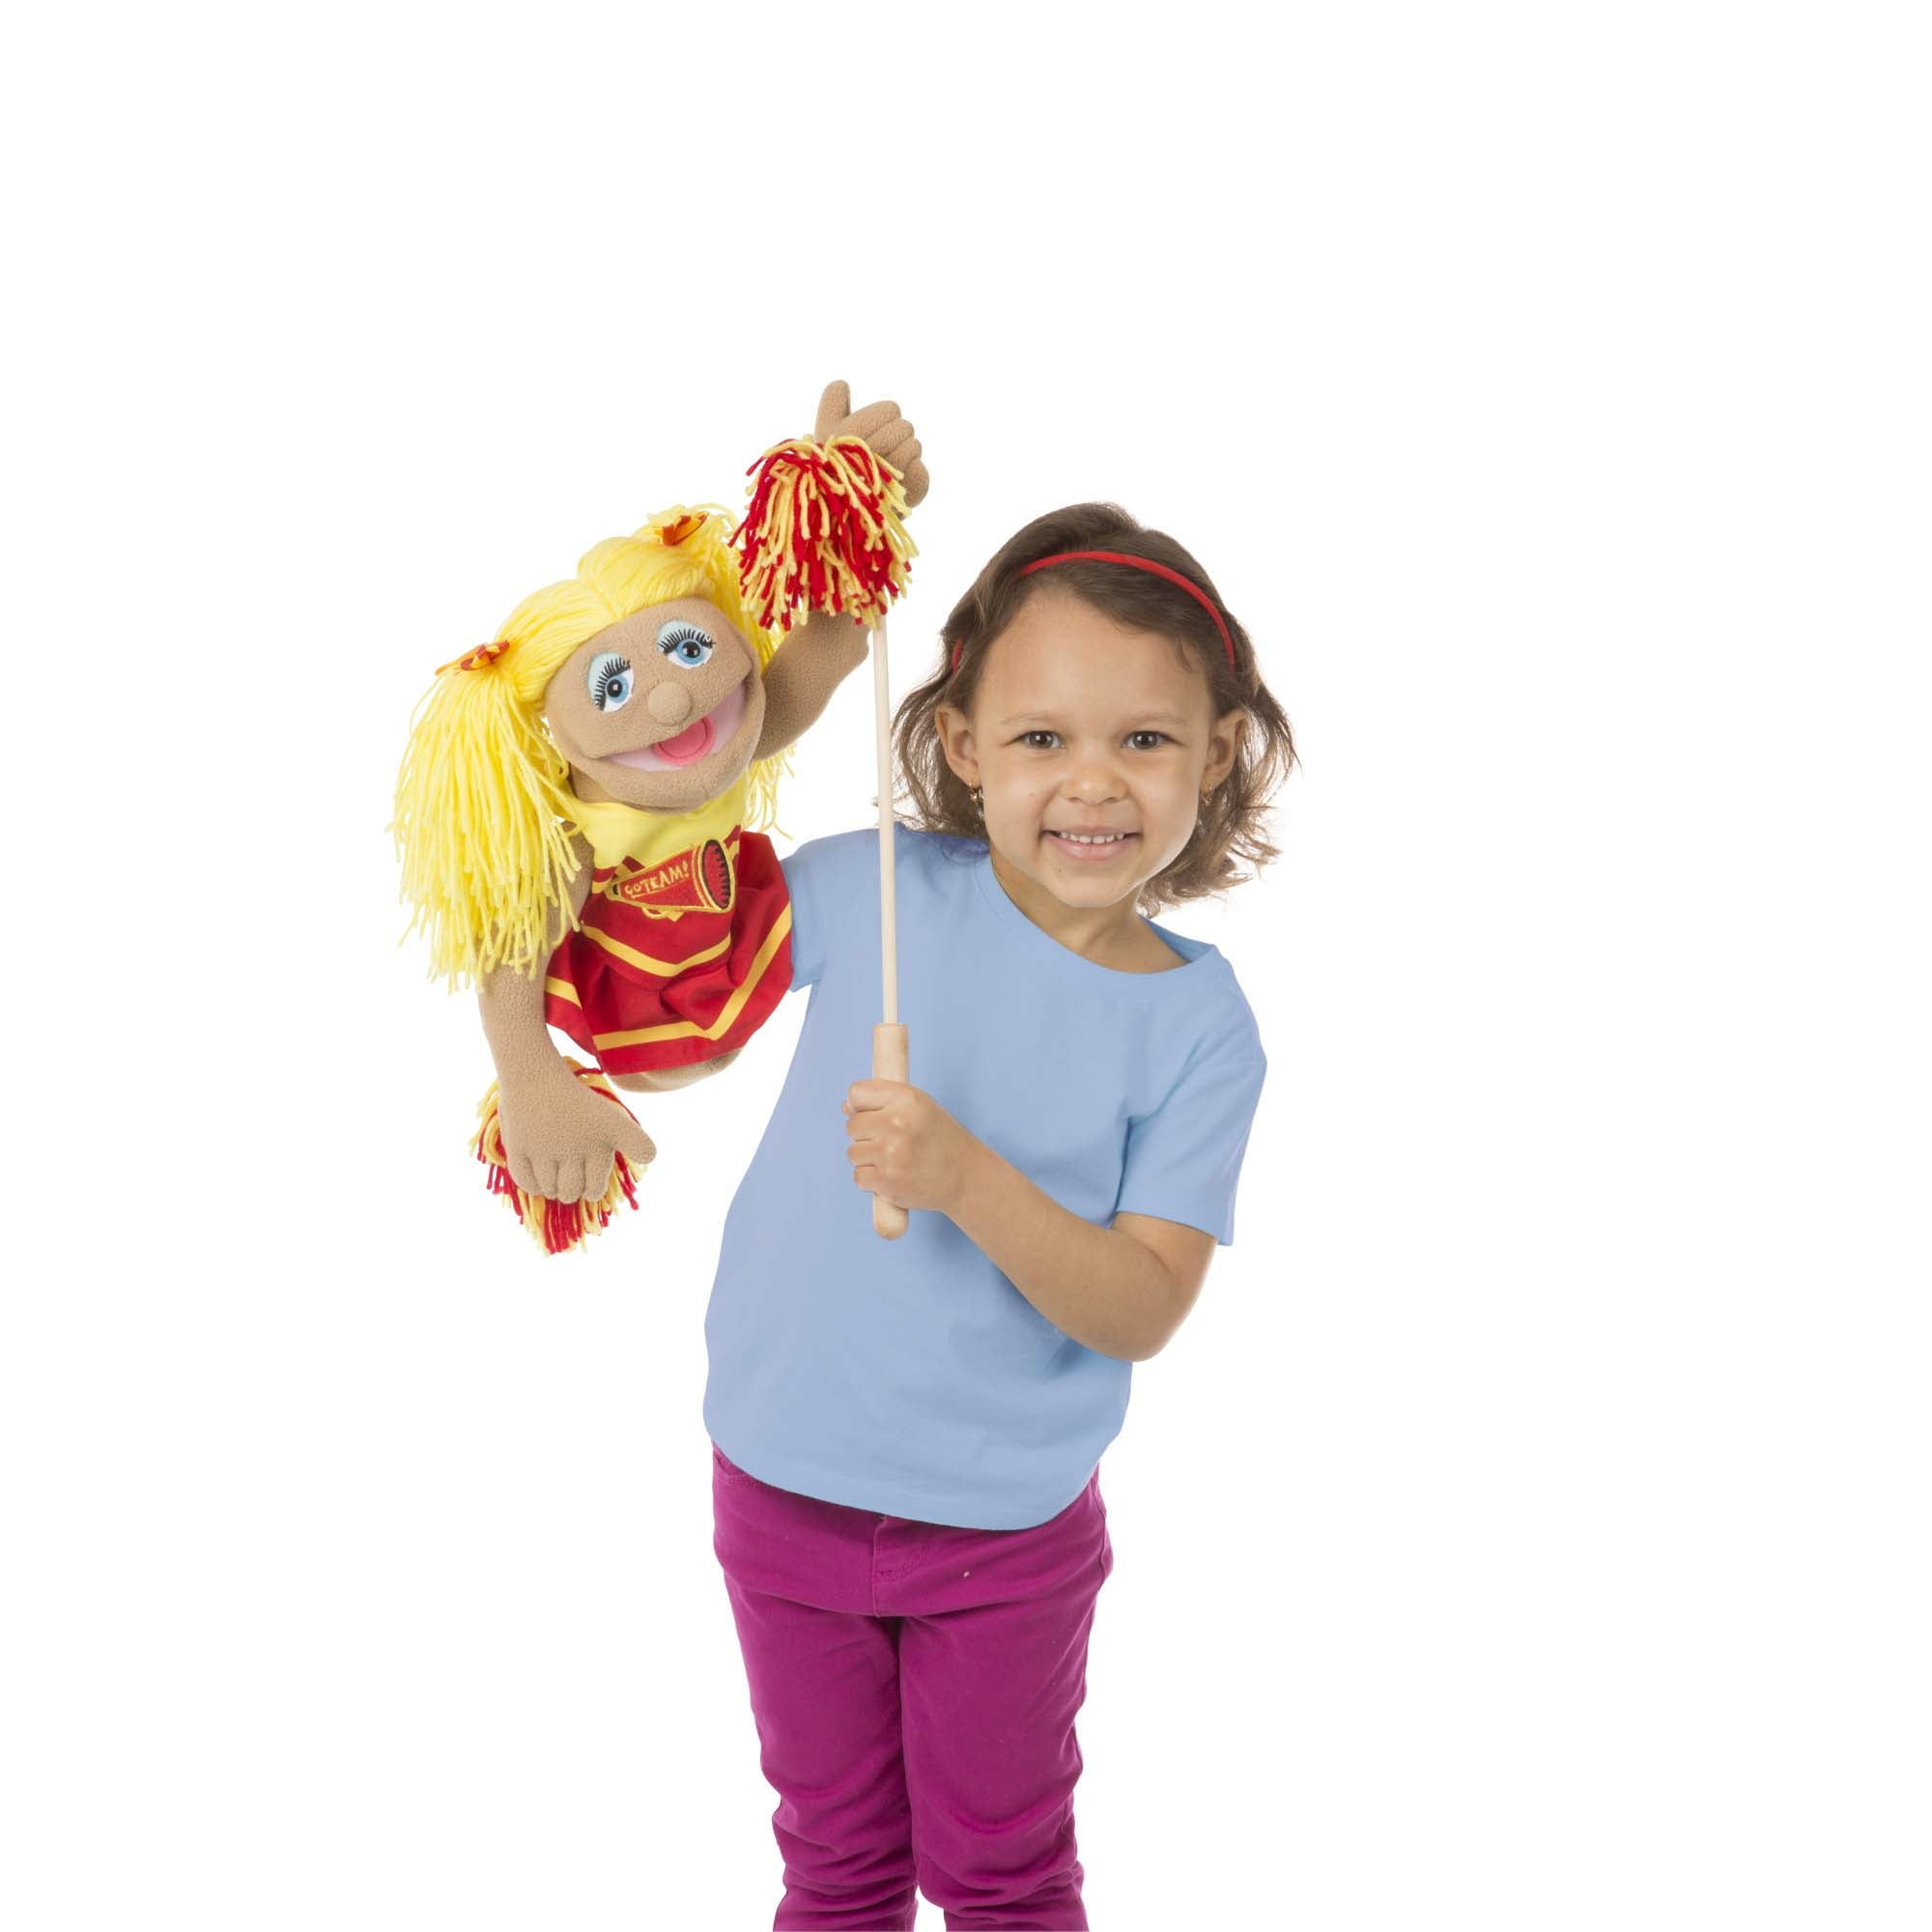 Melissa & Doug Cheerleader Puppet With Detachable Wooden Rod for Animated #2554 